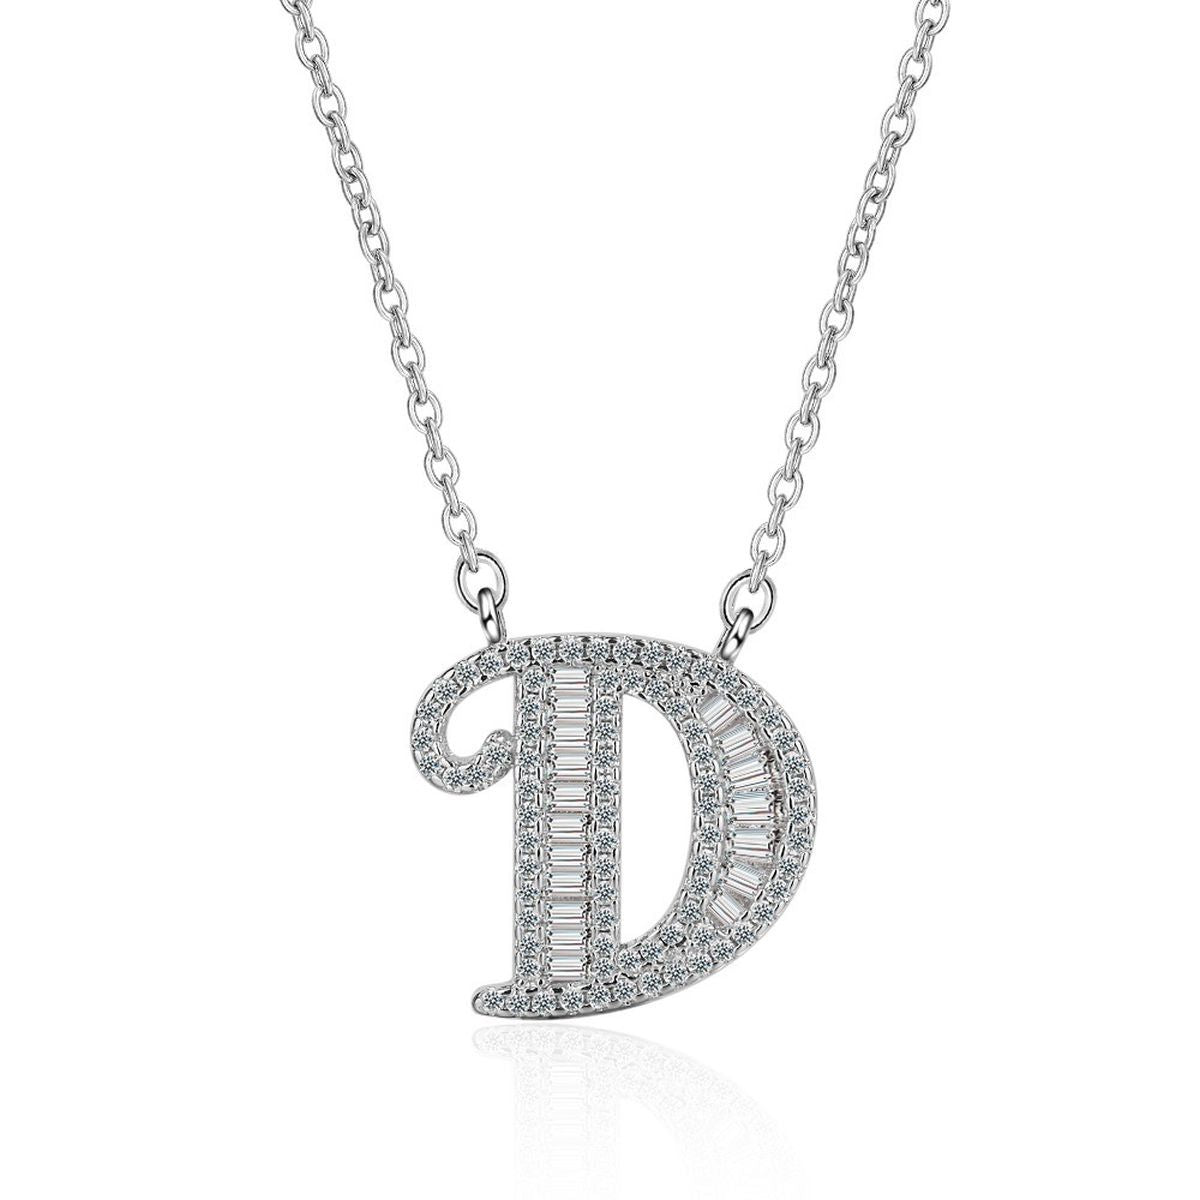 50% OFF on Chandrika Pearls Gems & Jewellers 24K Silver White Gold/Platinum  Plated Copper A-Z Letters Initial Pendant (D) Necklace for Girls on Amazon  | PaisaWapas.com